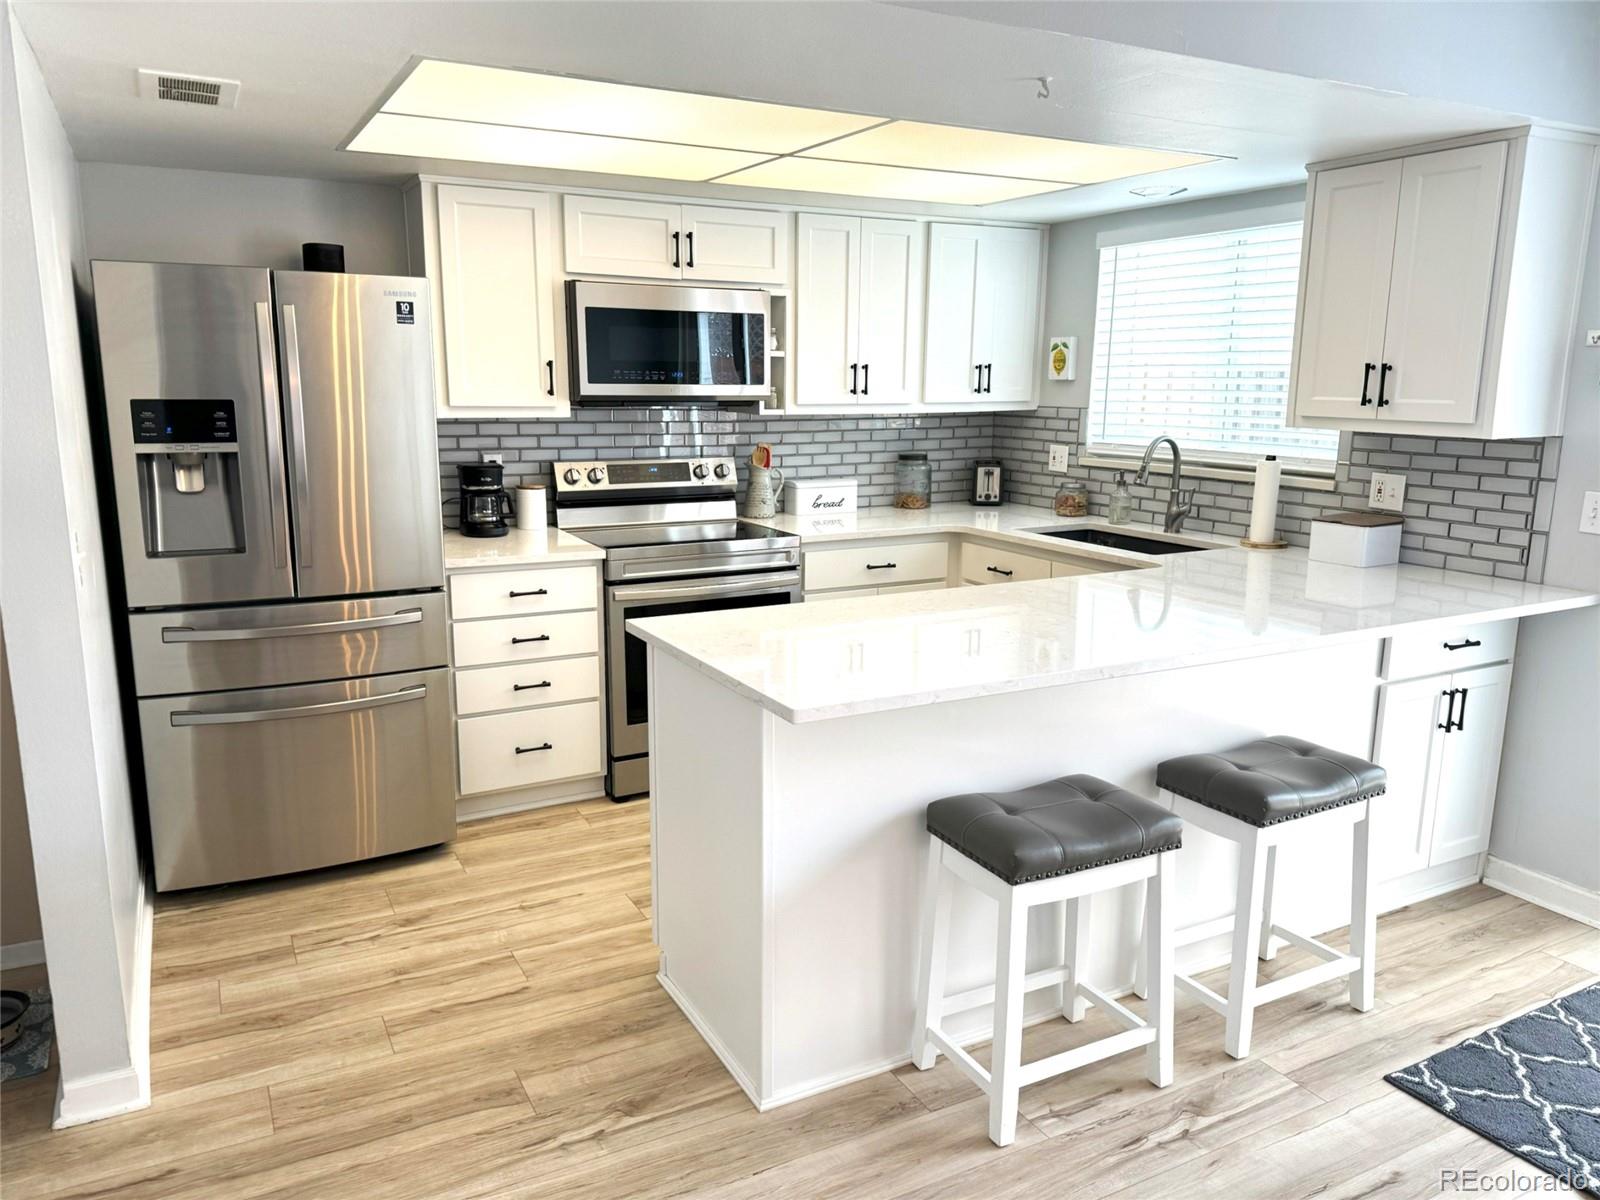 a kitchen with stainless steel appliances a stove a sink refrigerator and white cabinets with wooden floor